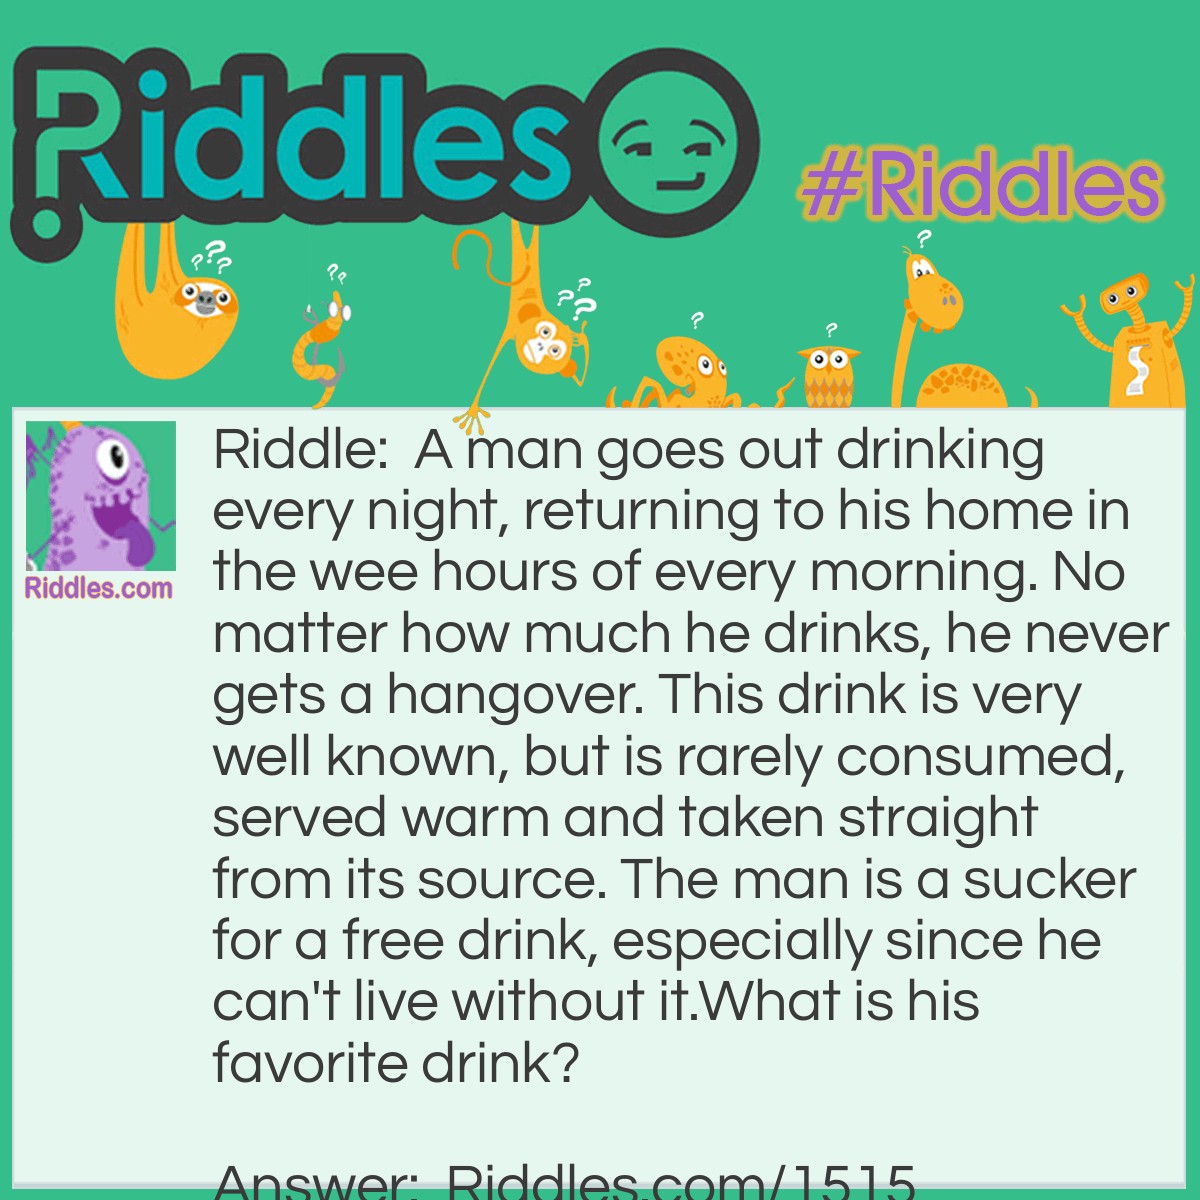 Riddle: A man goes out drinking every night, returning to his home in the wee hours of every morning. No matter how much he drinks, he never gets a hangover. This drink is very well known, but is rarely consumed, served warm and taken straight from its source. The man is a sucker for a free drink, especially since he can't live without it.
What is his favorite drink? Answer: Blood. The man is a Vampire.